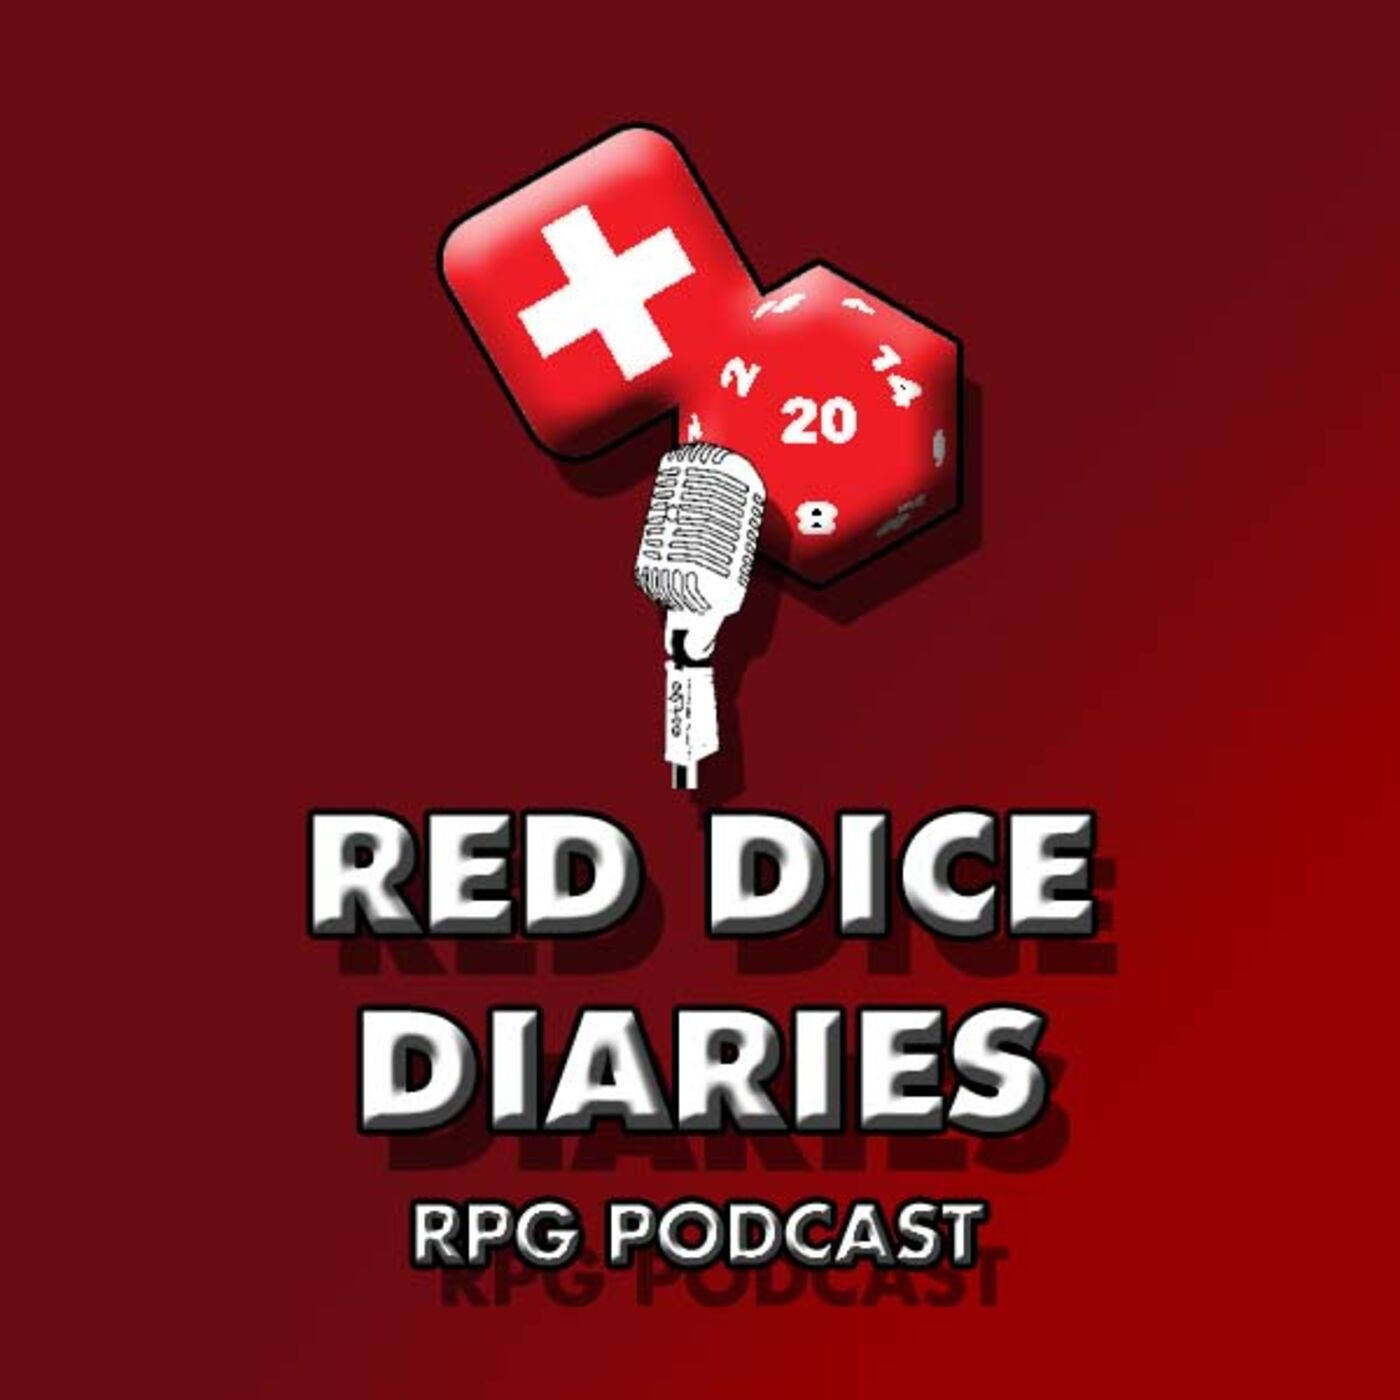 Thursday Postbag - Movie recommendations, the D&D Cartoon and GM terminology